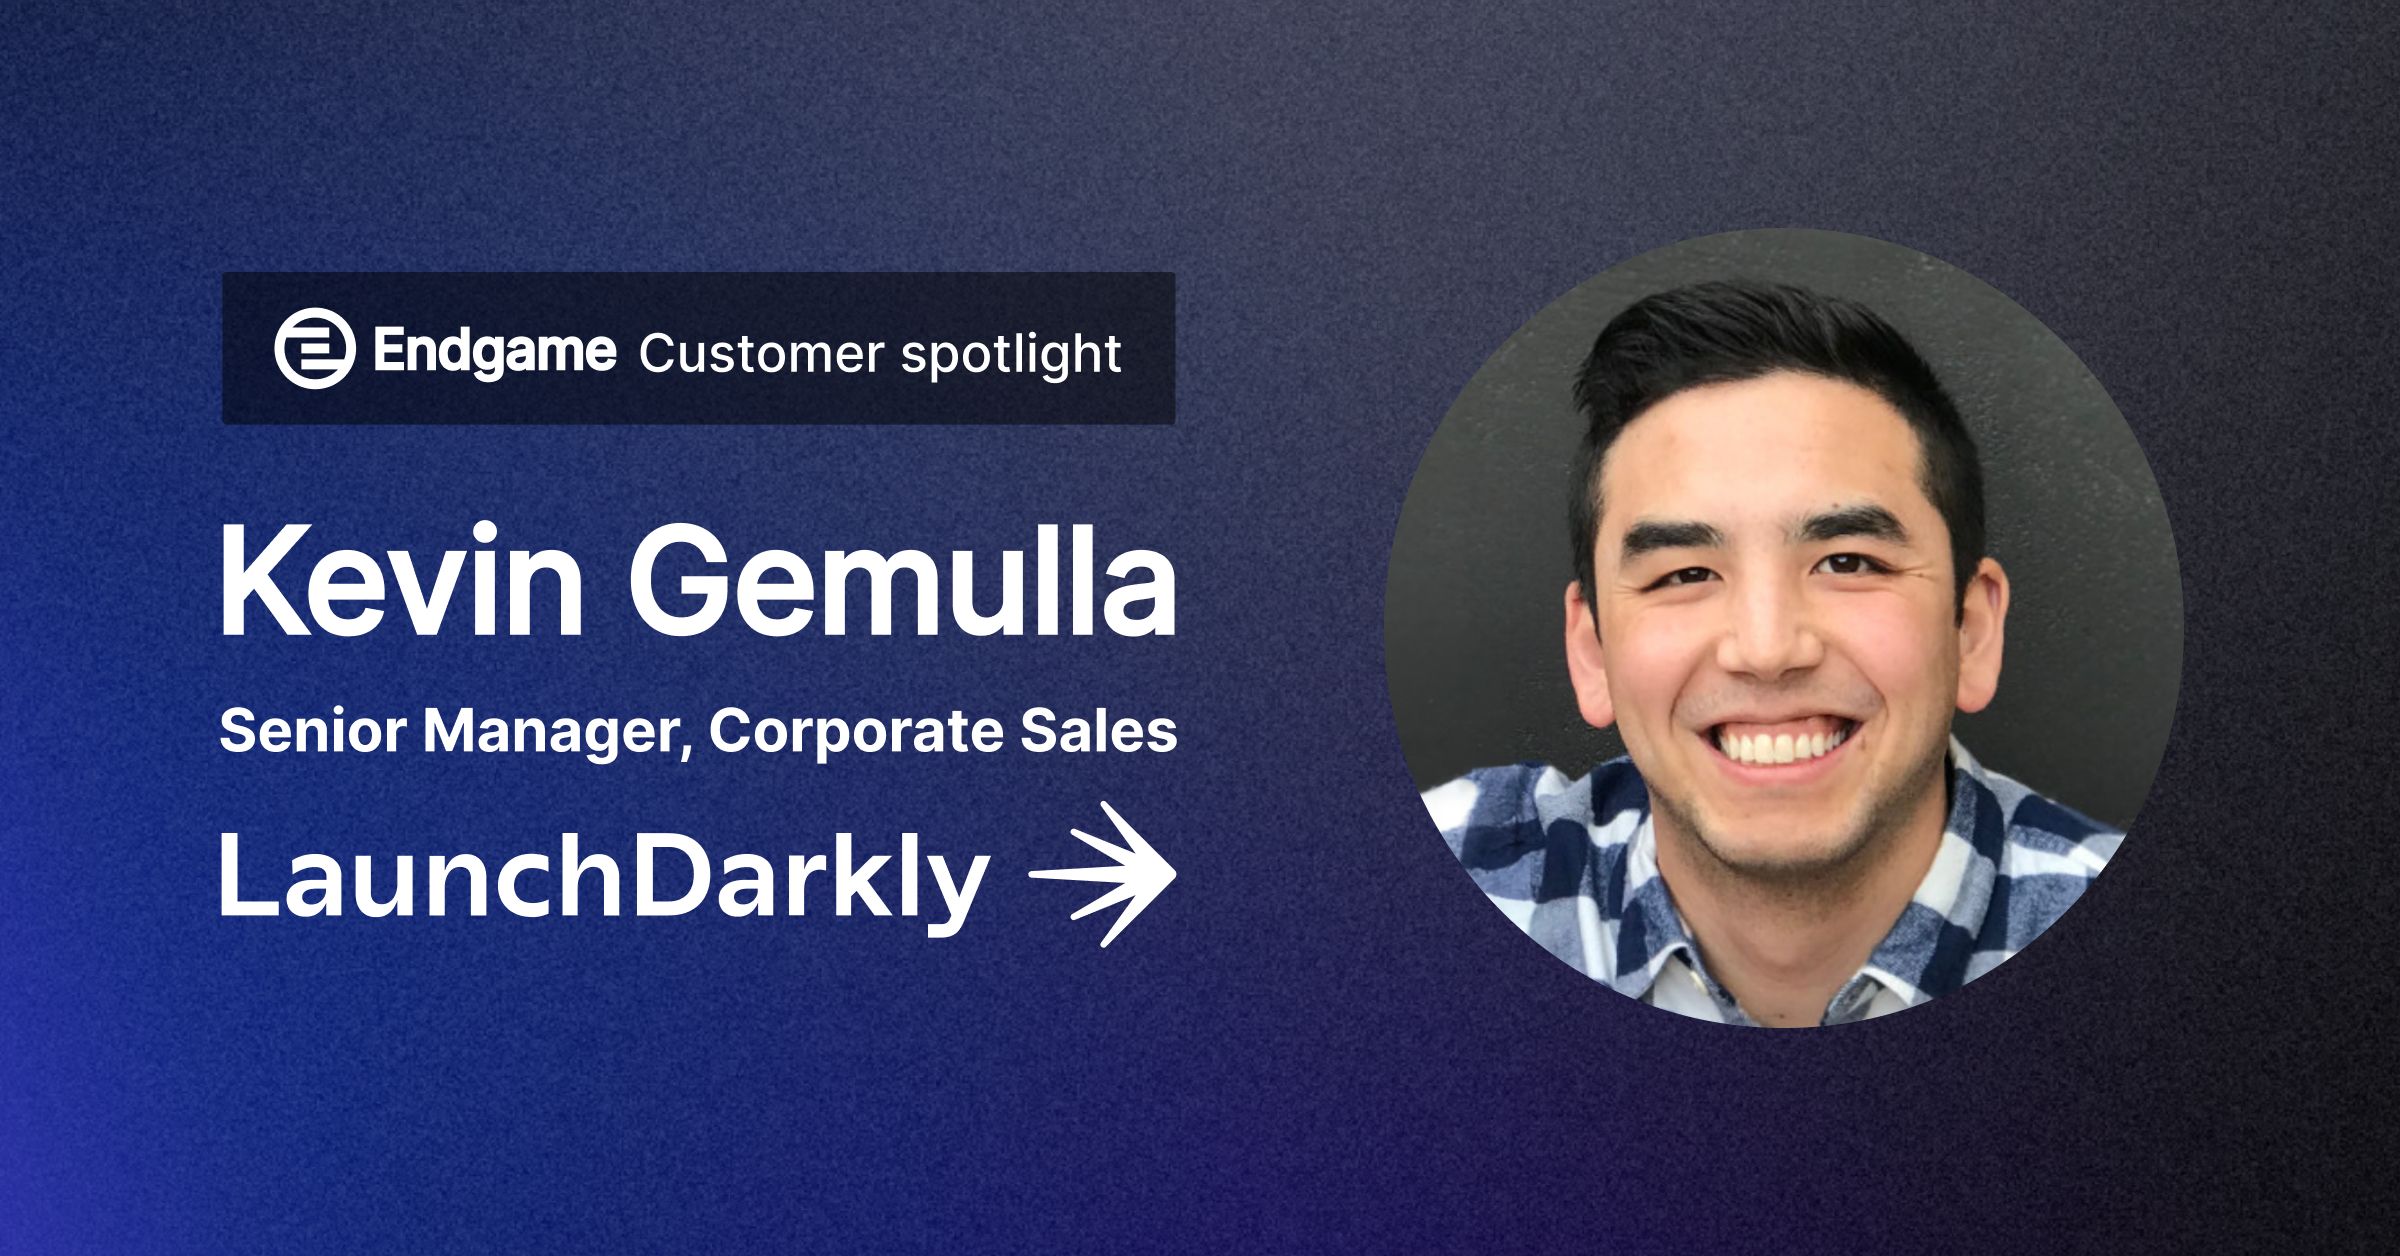 How LaunchDarkly prioritizes accounts and finds new revenue opportunities with Endgame  main image